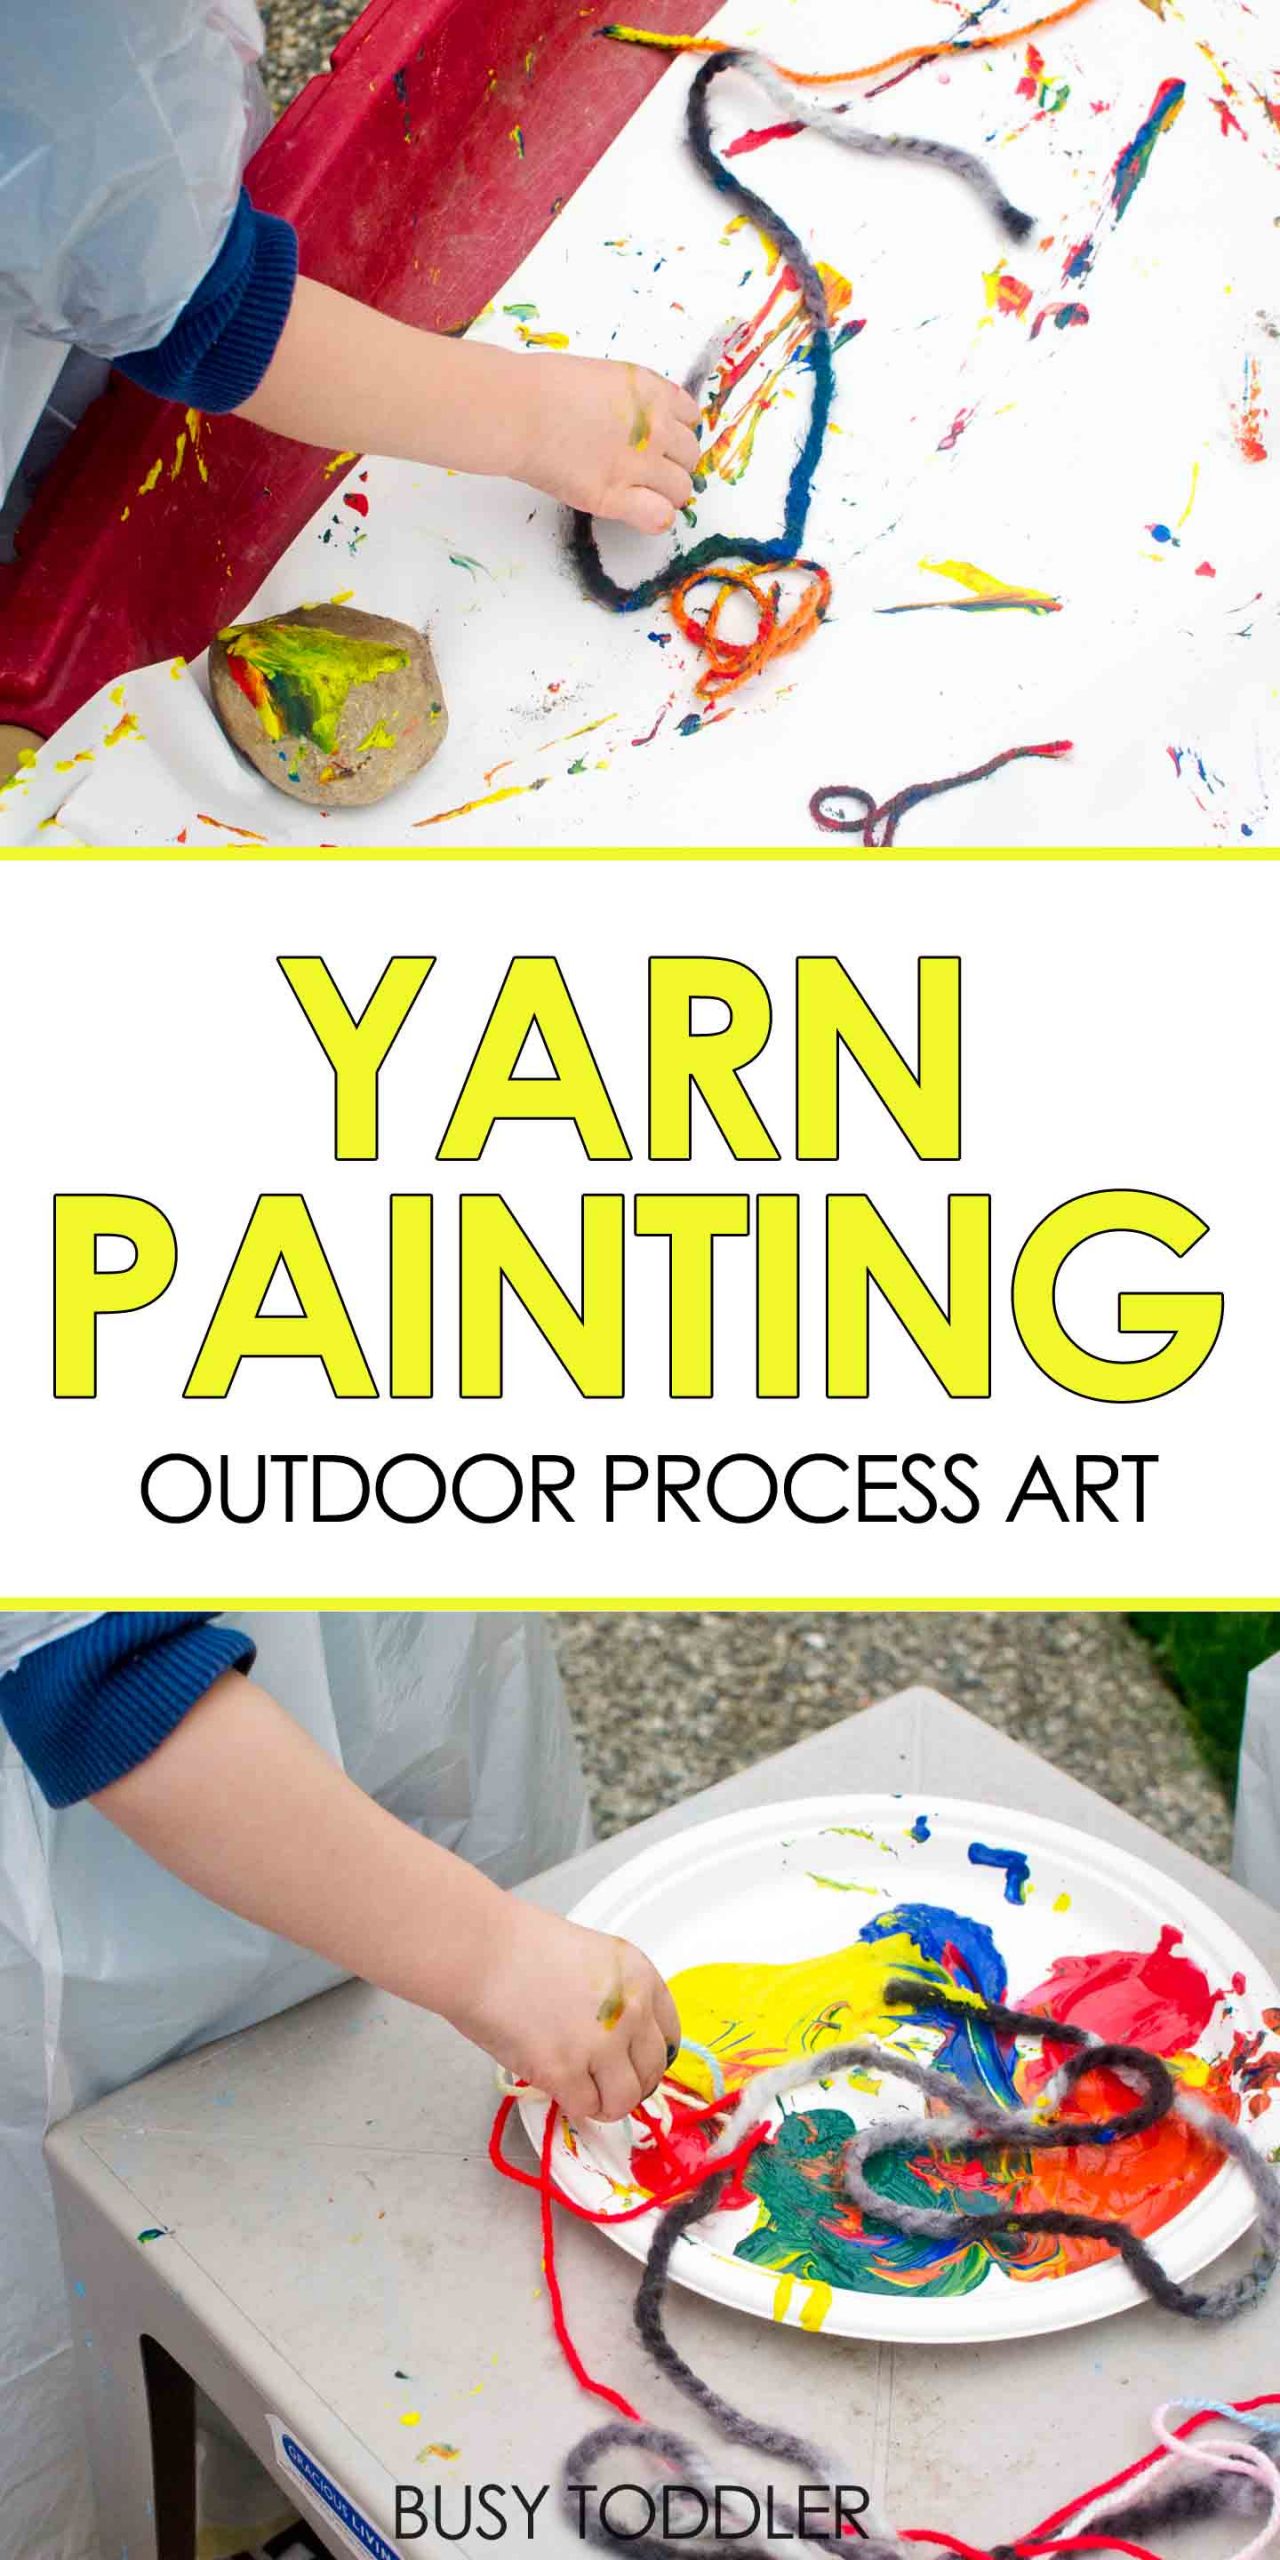 Outdoor Art Projects
 Yarn Painting Outdoor Process Art Busy Toddler